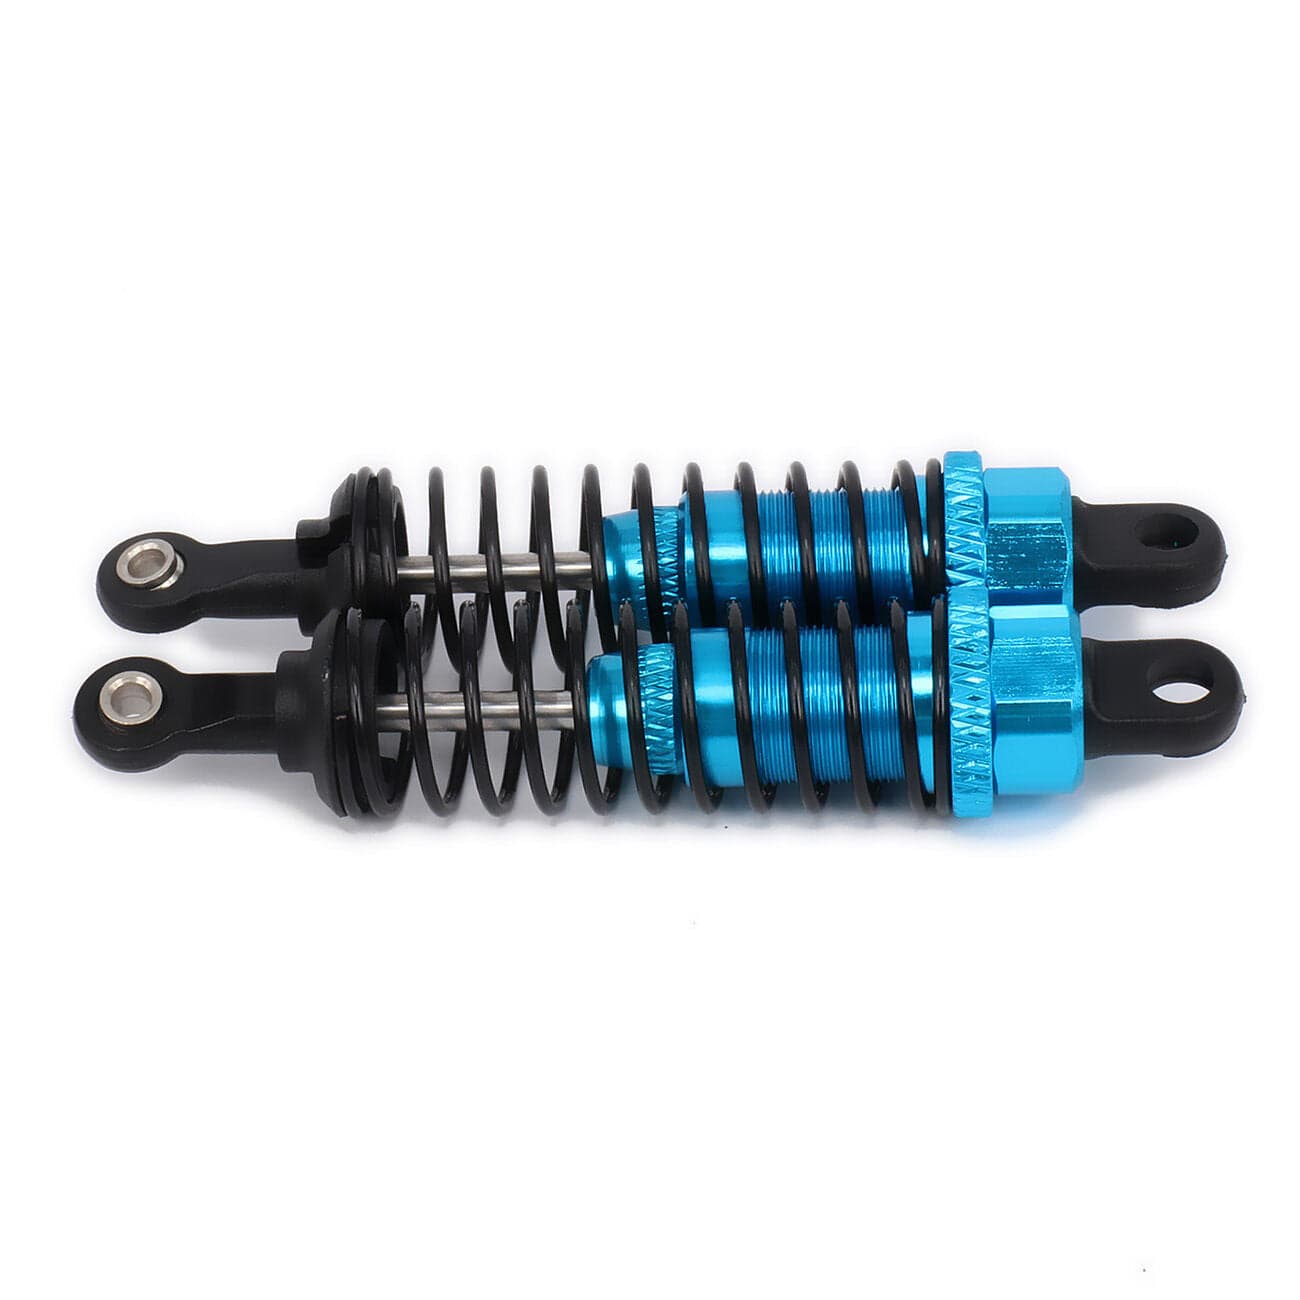 RCAWD RC CAR UPGRADE PARTS Blue RCAWD 70mm Shock Absorber Damper Oil Adjustable 2PCS For Rc Car 1/16 Model Car